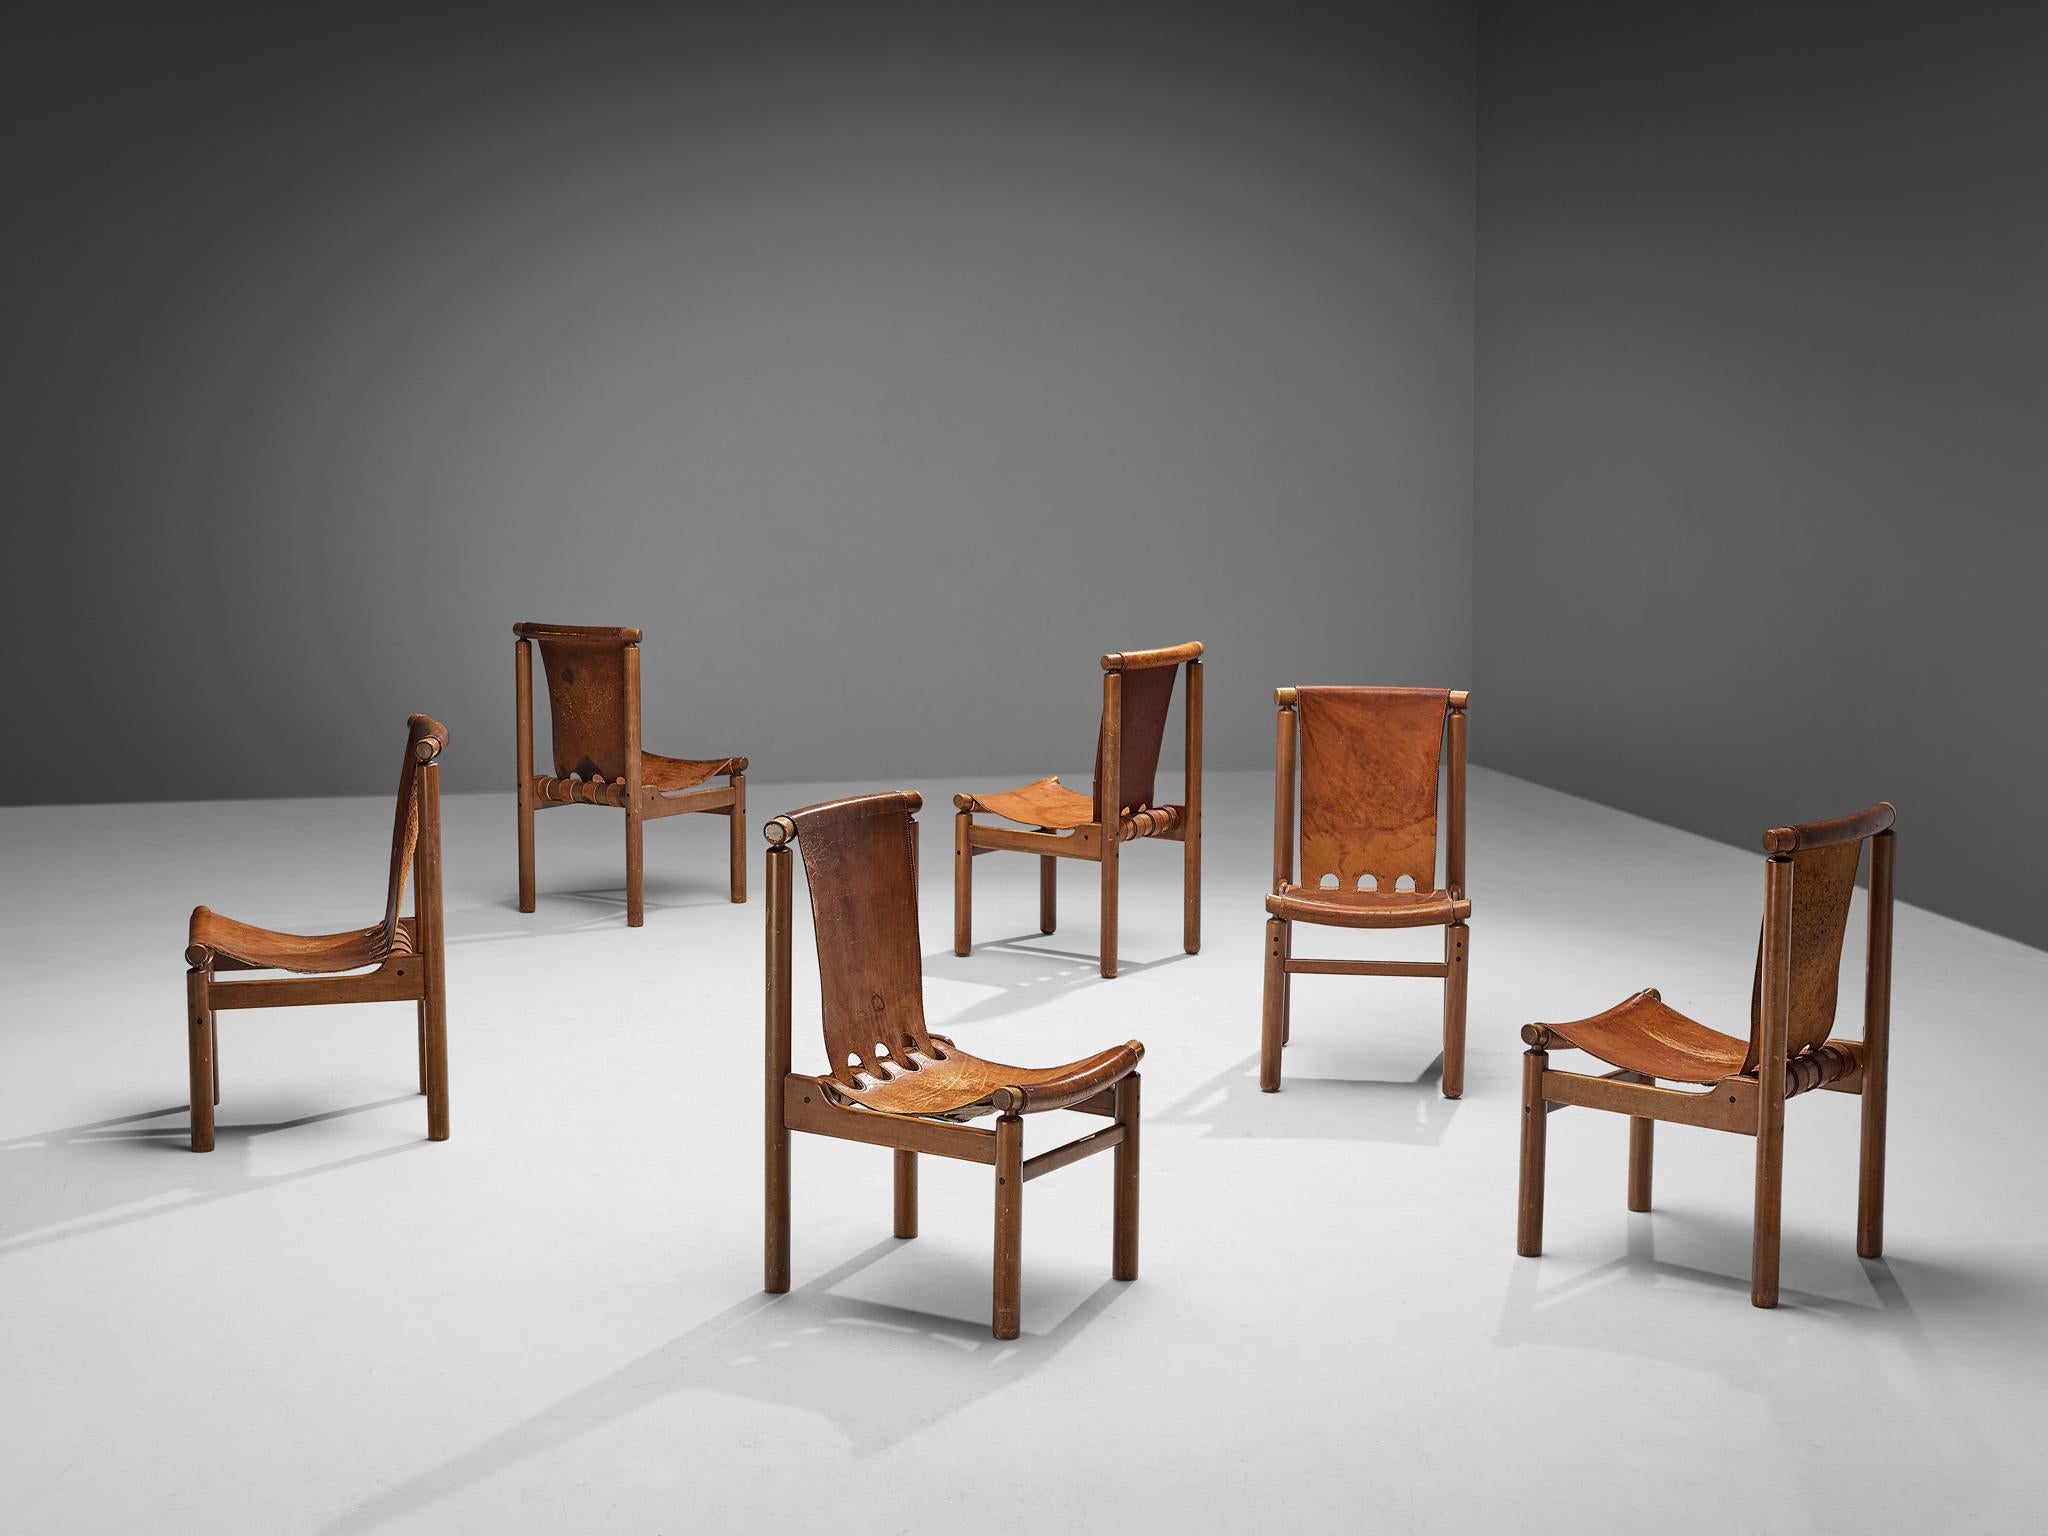 Ilmari Tapiovaara for La Permanente Mobili Cantù, darkened beech and patinated cognac leather, Finland, 1950s.

These robust chairs by Ilmari Tapiovaara feature a geometric frame for the patinated cognac leather seating and backrest. Besides the